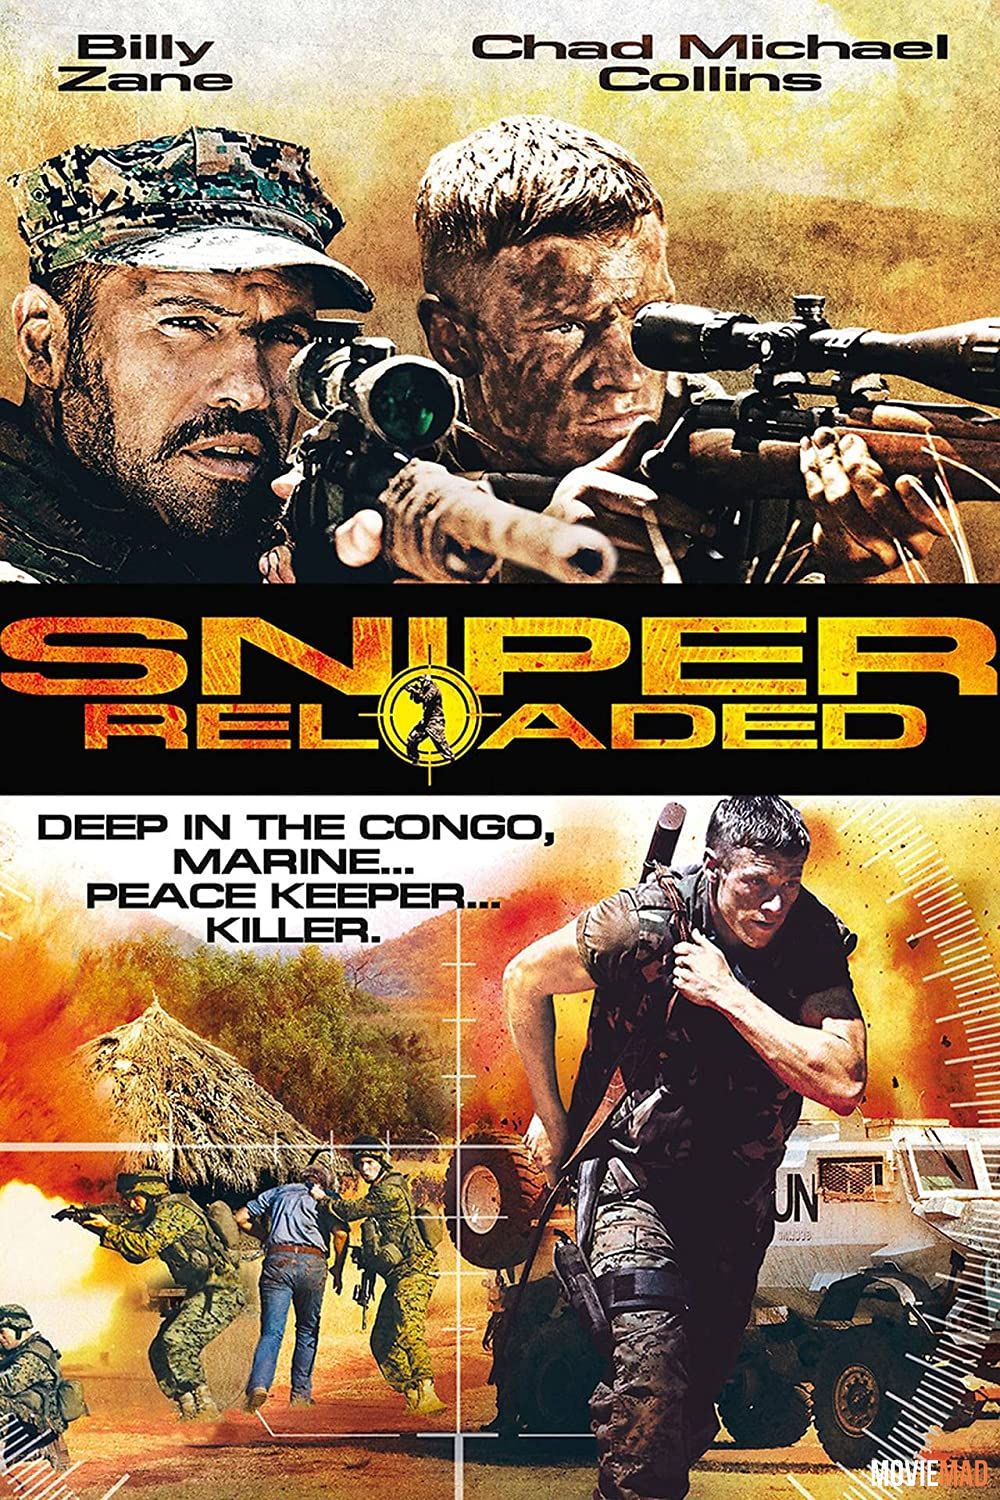 Sniper: Reloaded (2011) Hindi Dubbed ORG BluRay Full Movie 720p 480p